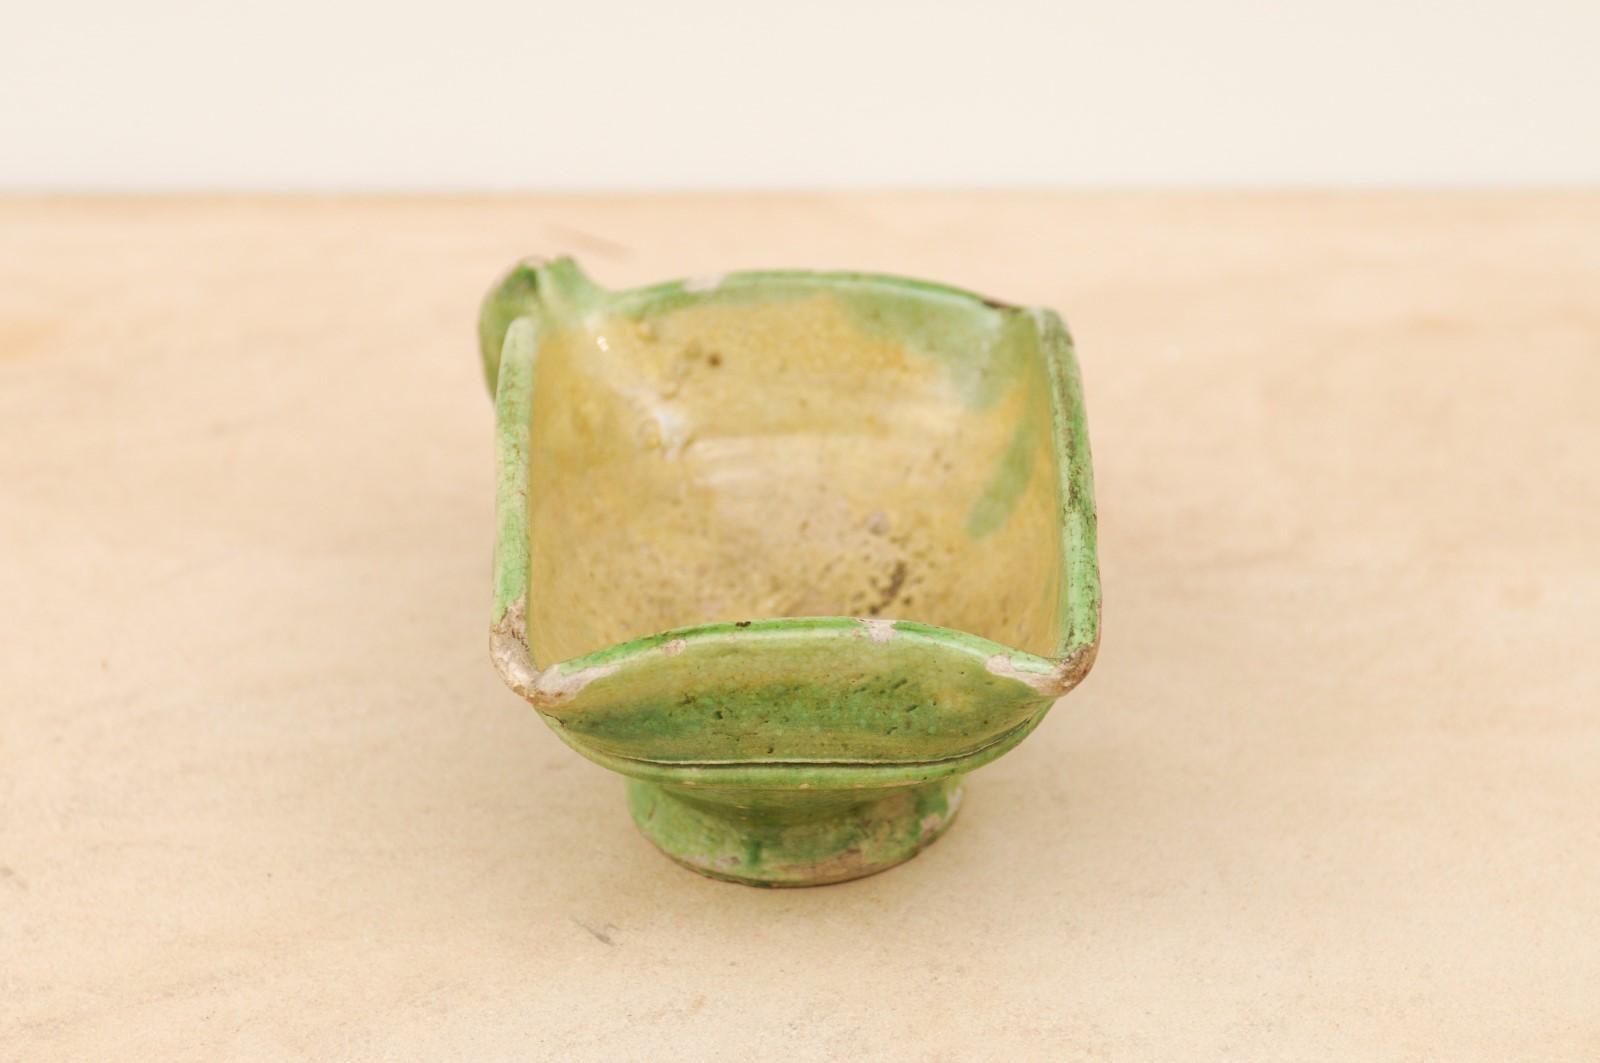 Rustic French 19th Century Green Glazed Square-Shaped Bowl with Weathered Patina For Sale 4